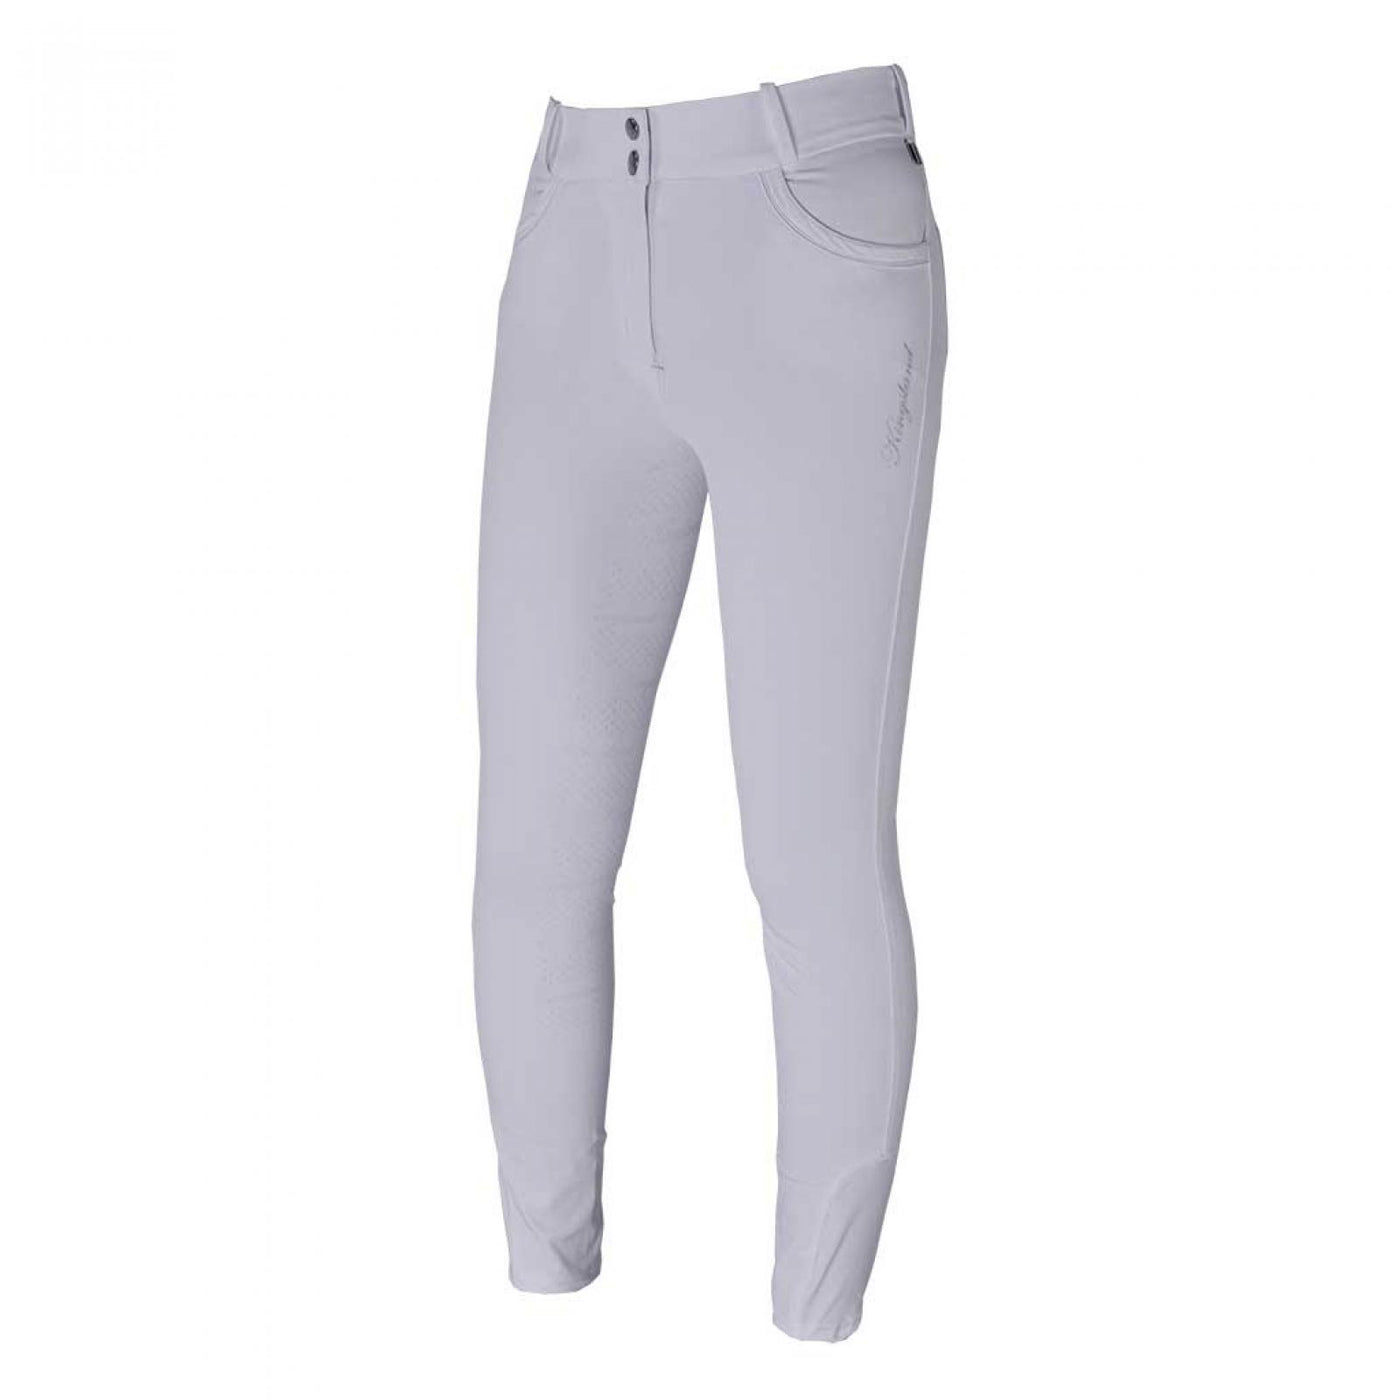 Kristina W E-Cot Full Grip Breeches - OUTLET